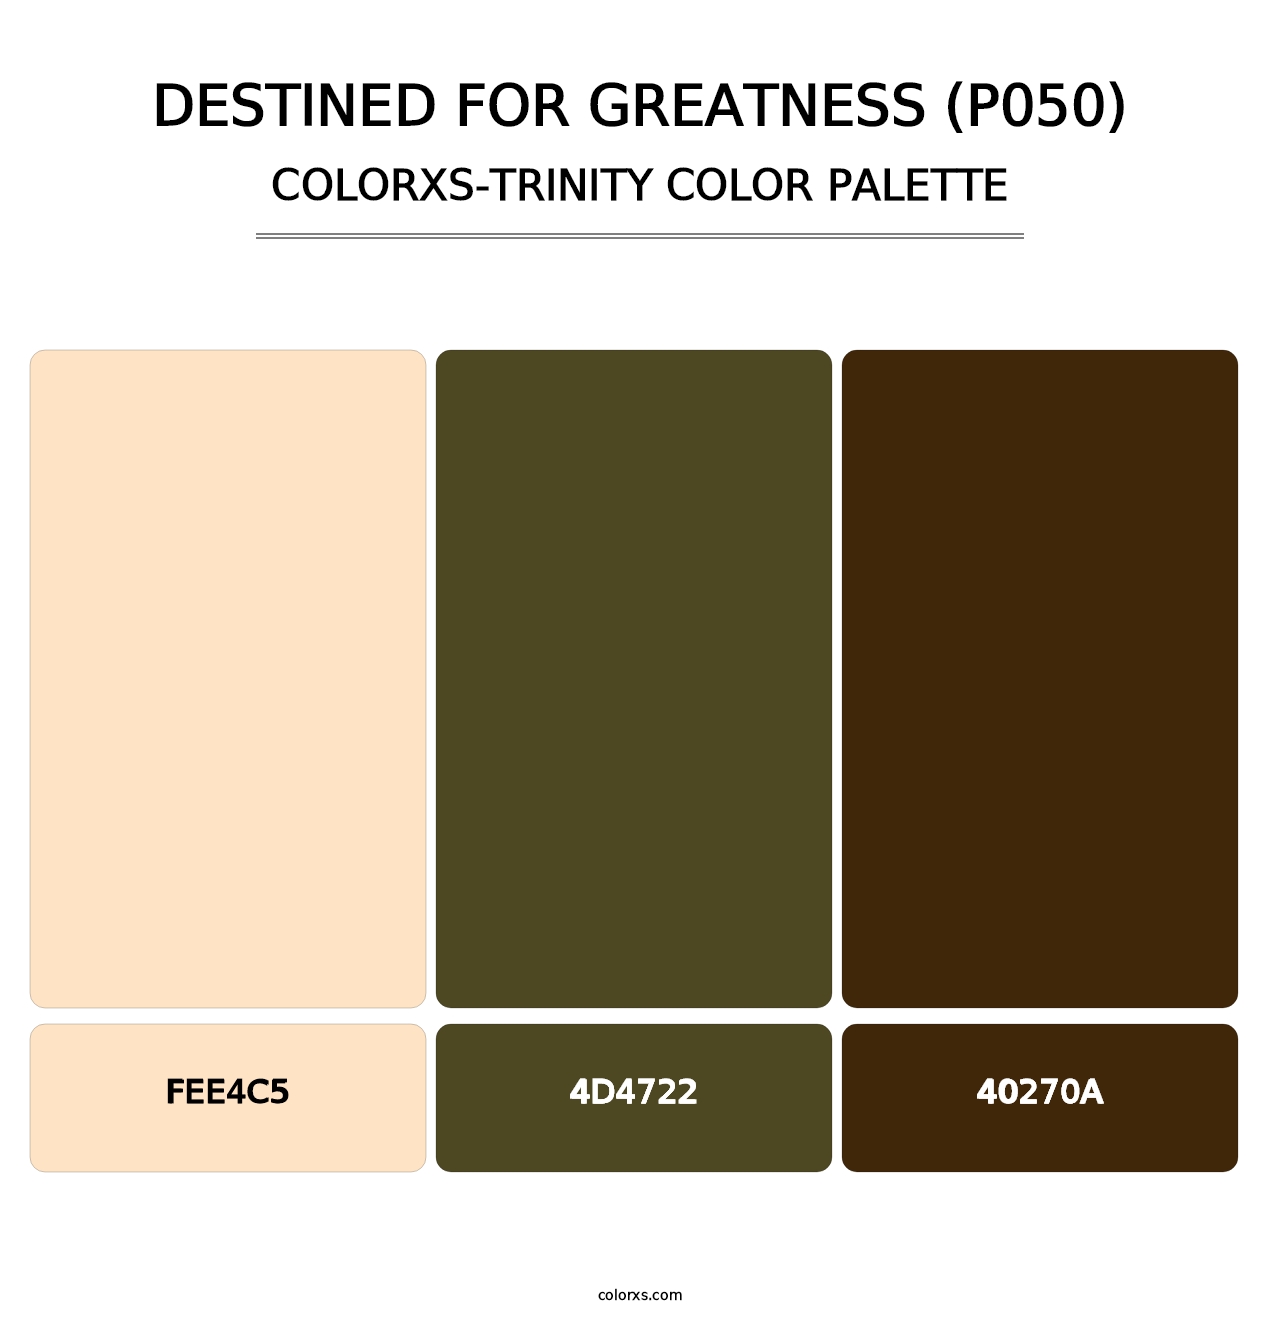 Destined for Greatness (P050) - Colorxs Trinity Palette